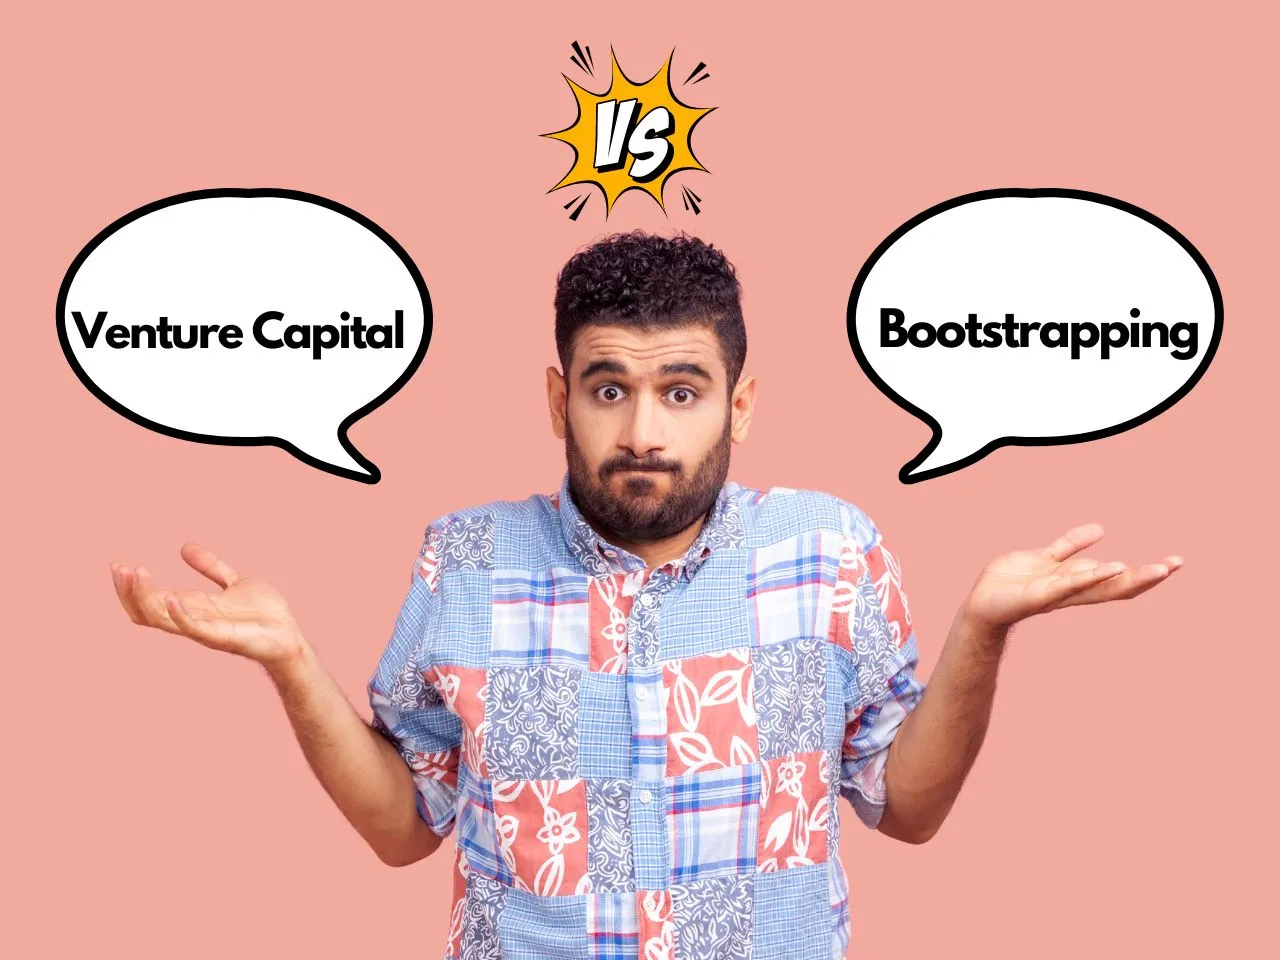 Venture Capital vs. Bootstrapping: What Entrepreneurs Should Opt For?